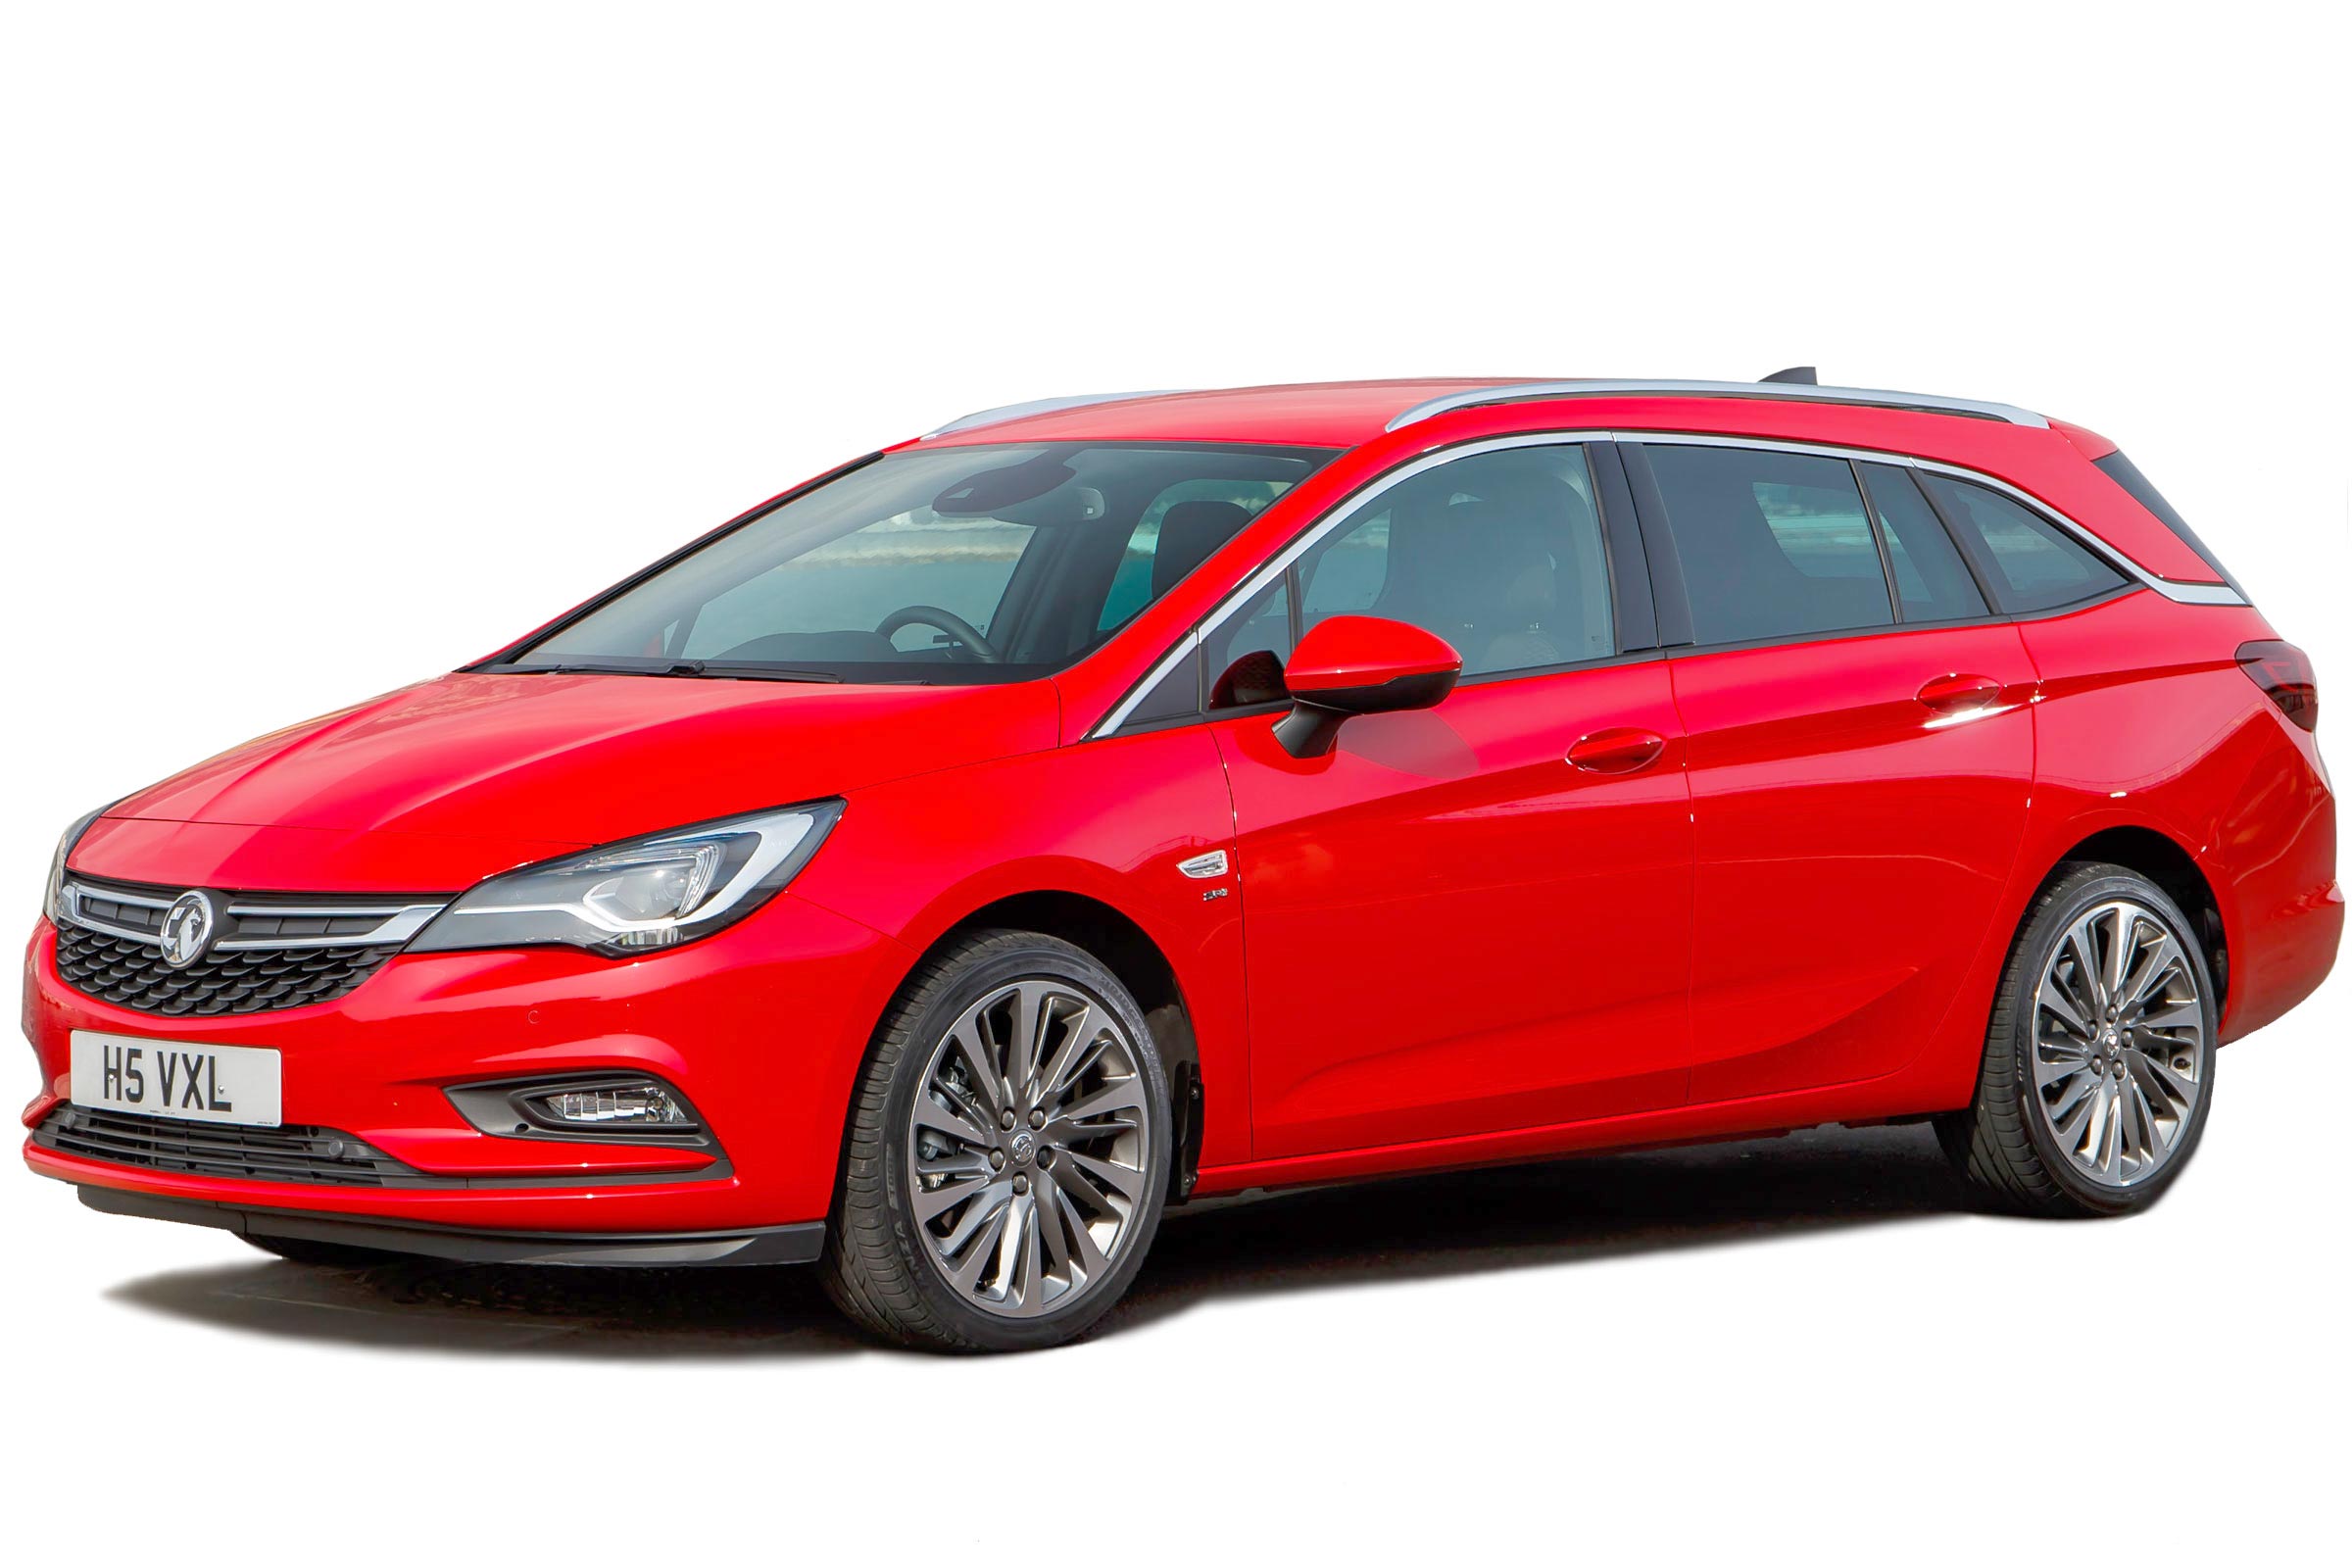 Vauxhall Astra Sports Tourer estate (2016-2021) - MPG, running costs & CO2